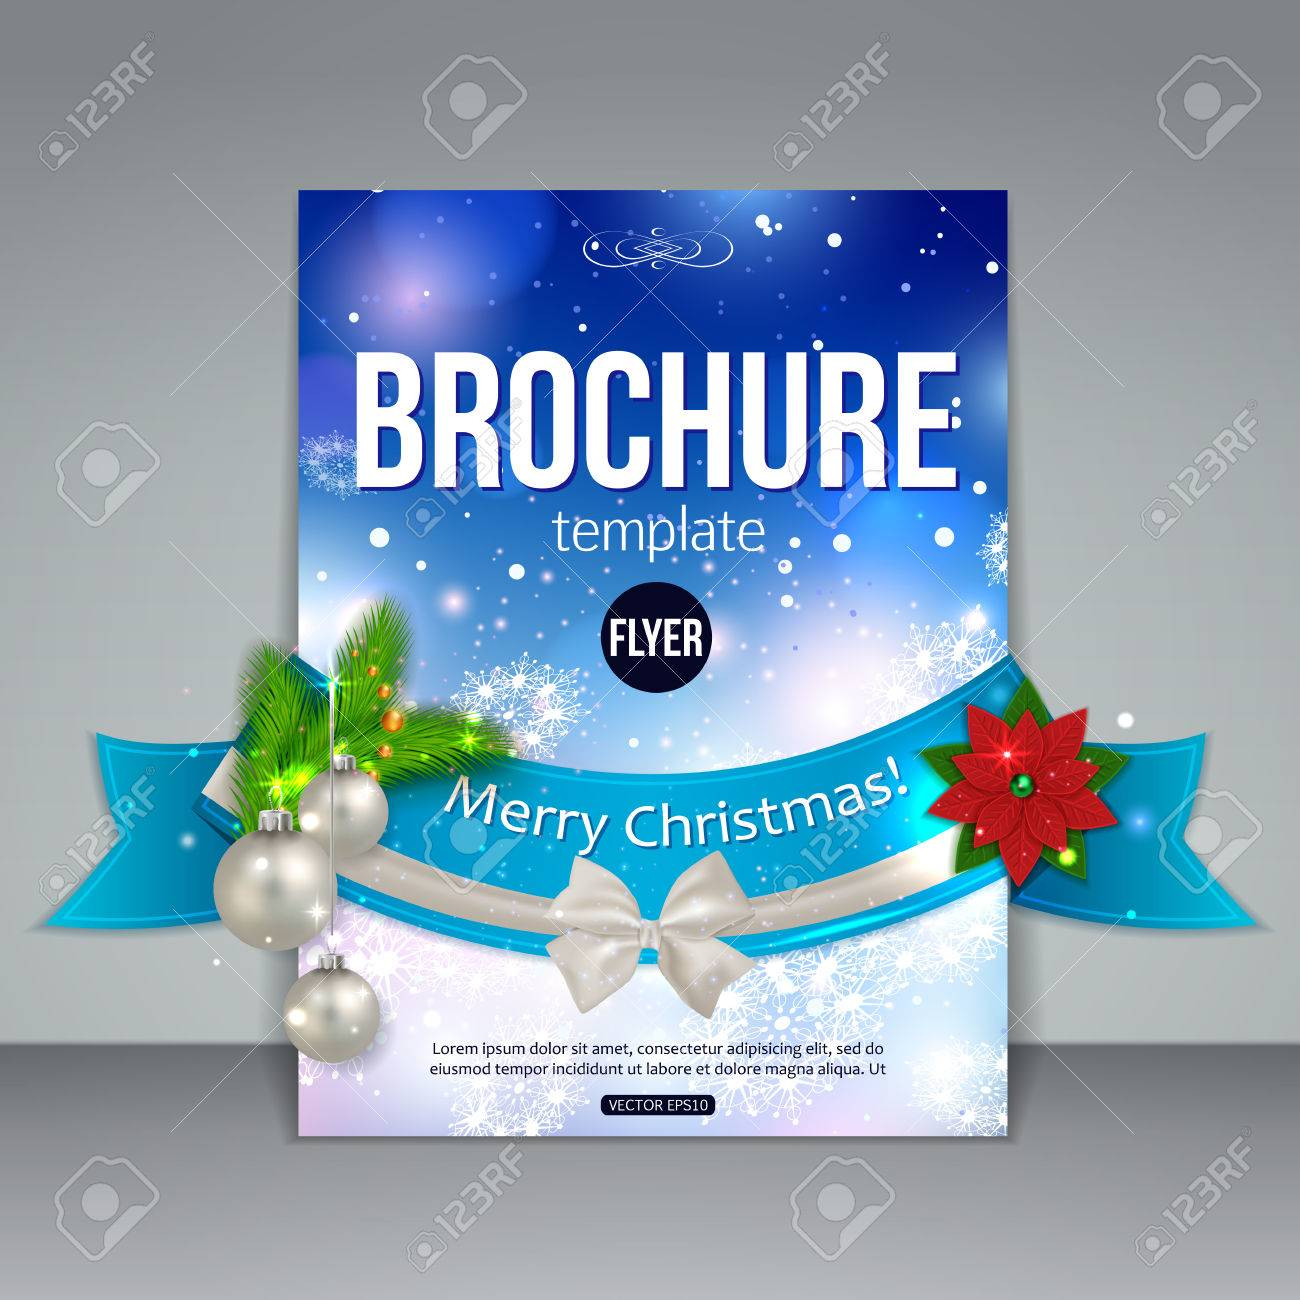 Christmas Brochure Template. Abstract Flyer Design With Xmas.. Pertaining To Christmas Brochure Templates Free